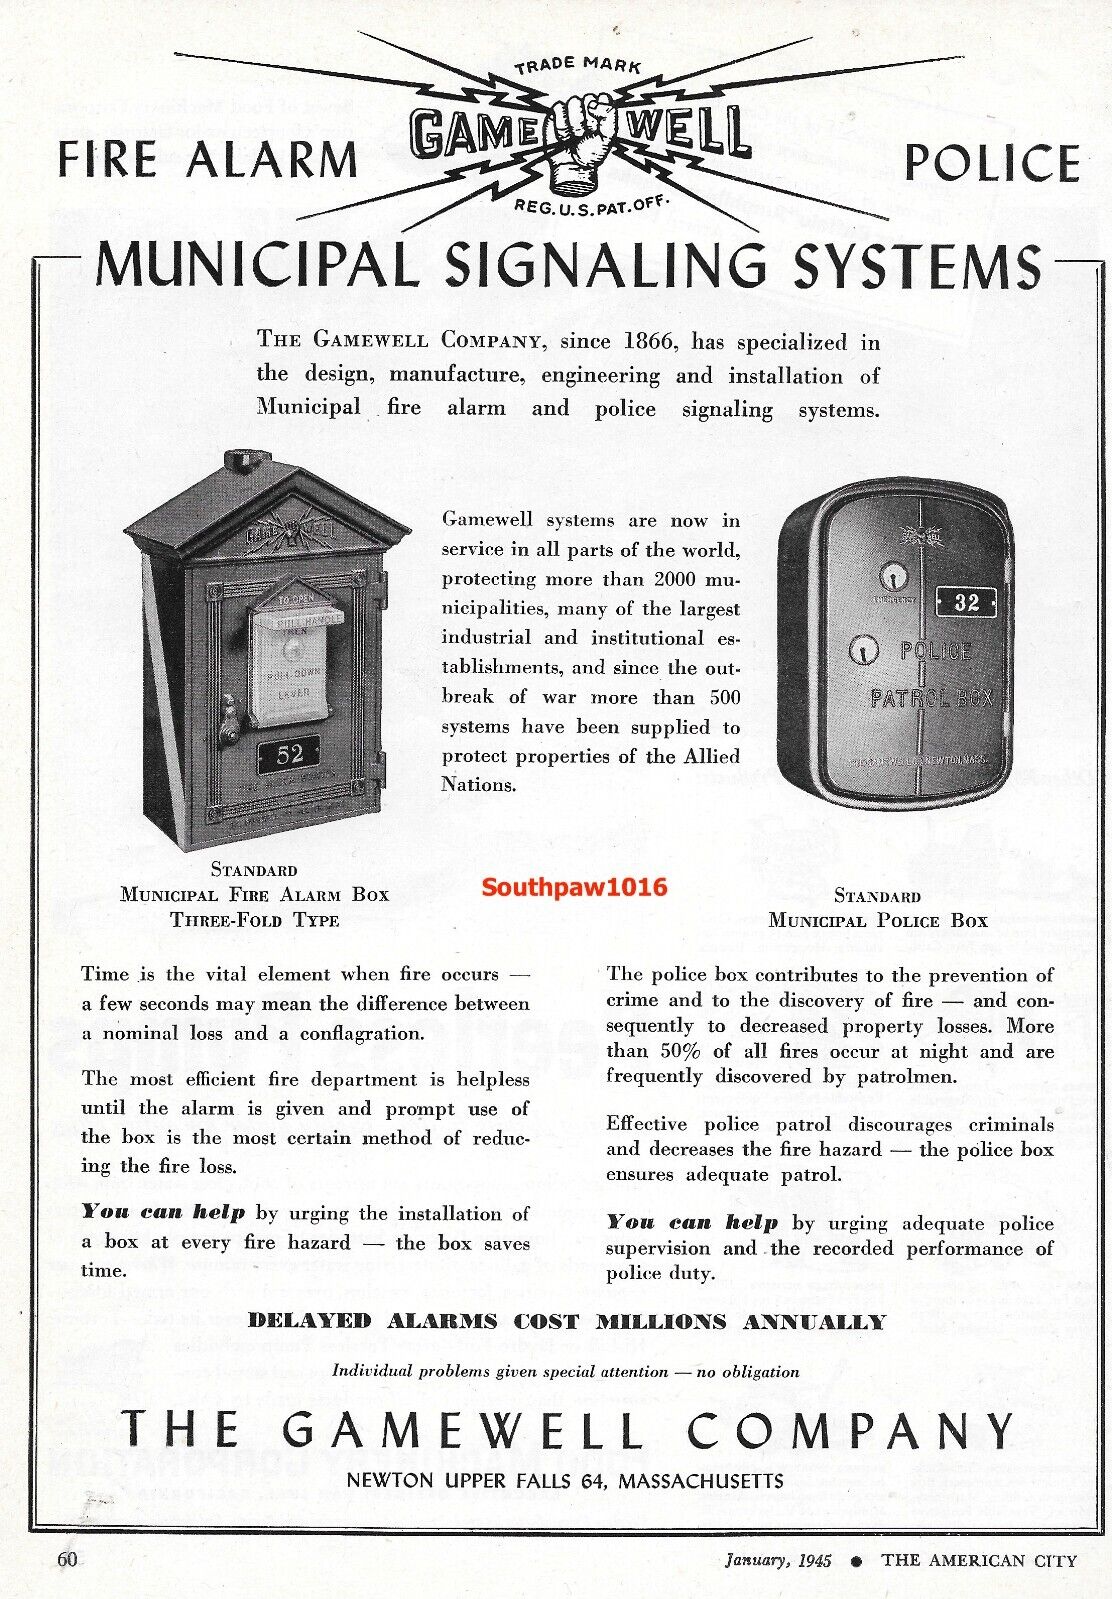 1945 Gamewell Fire & Police Municipal Signaling Systems Original Print Ad